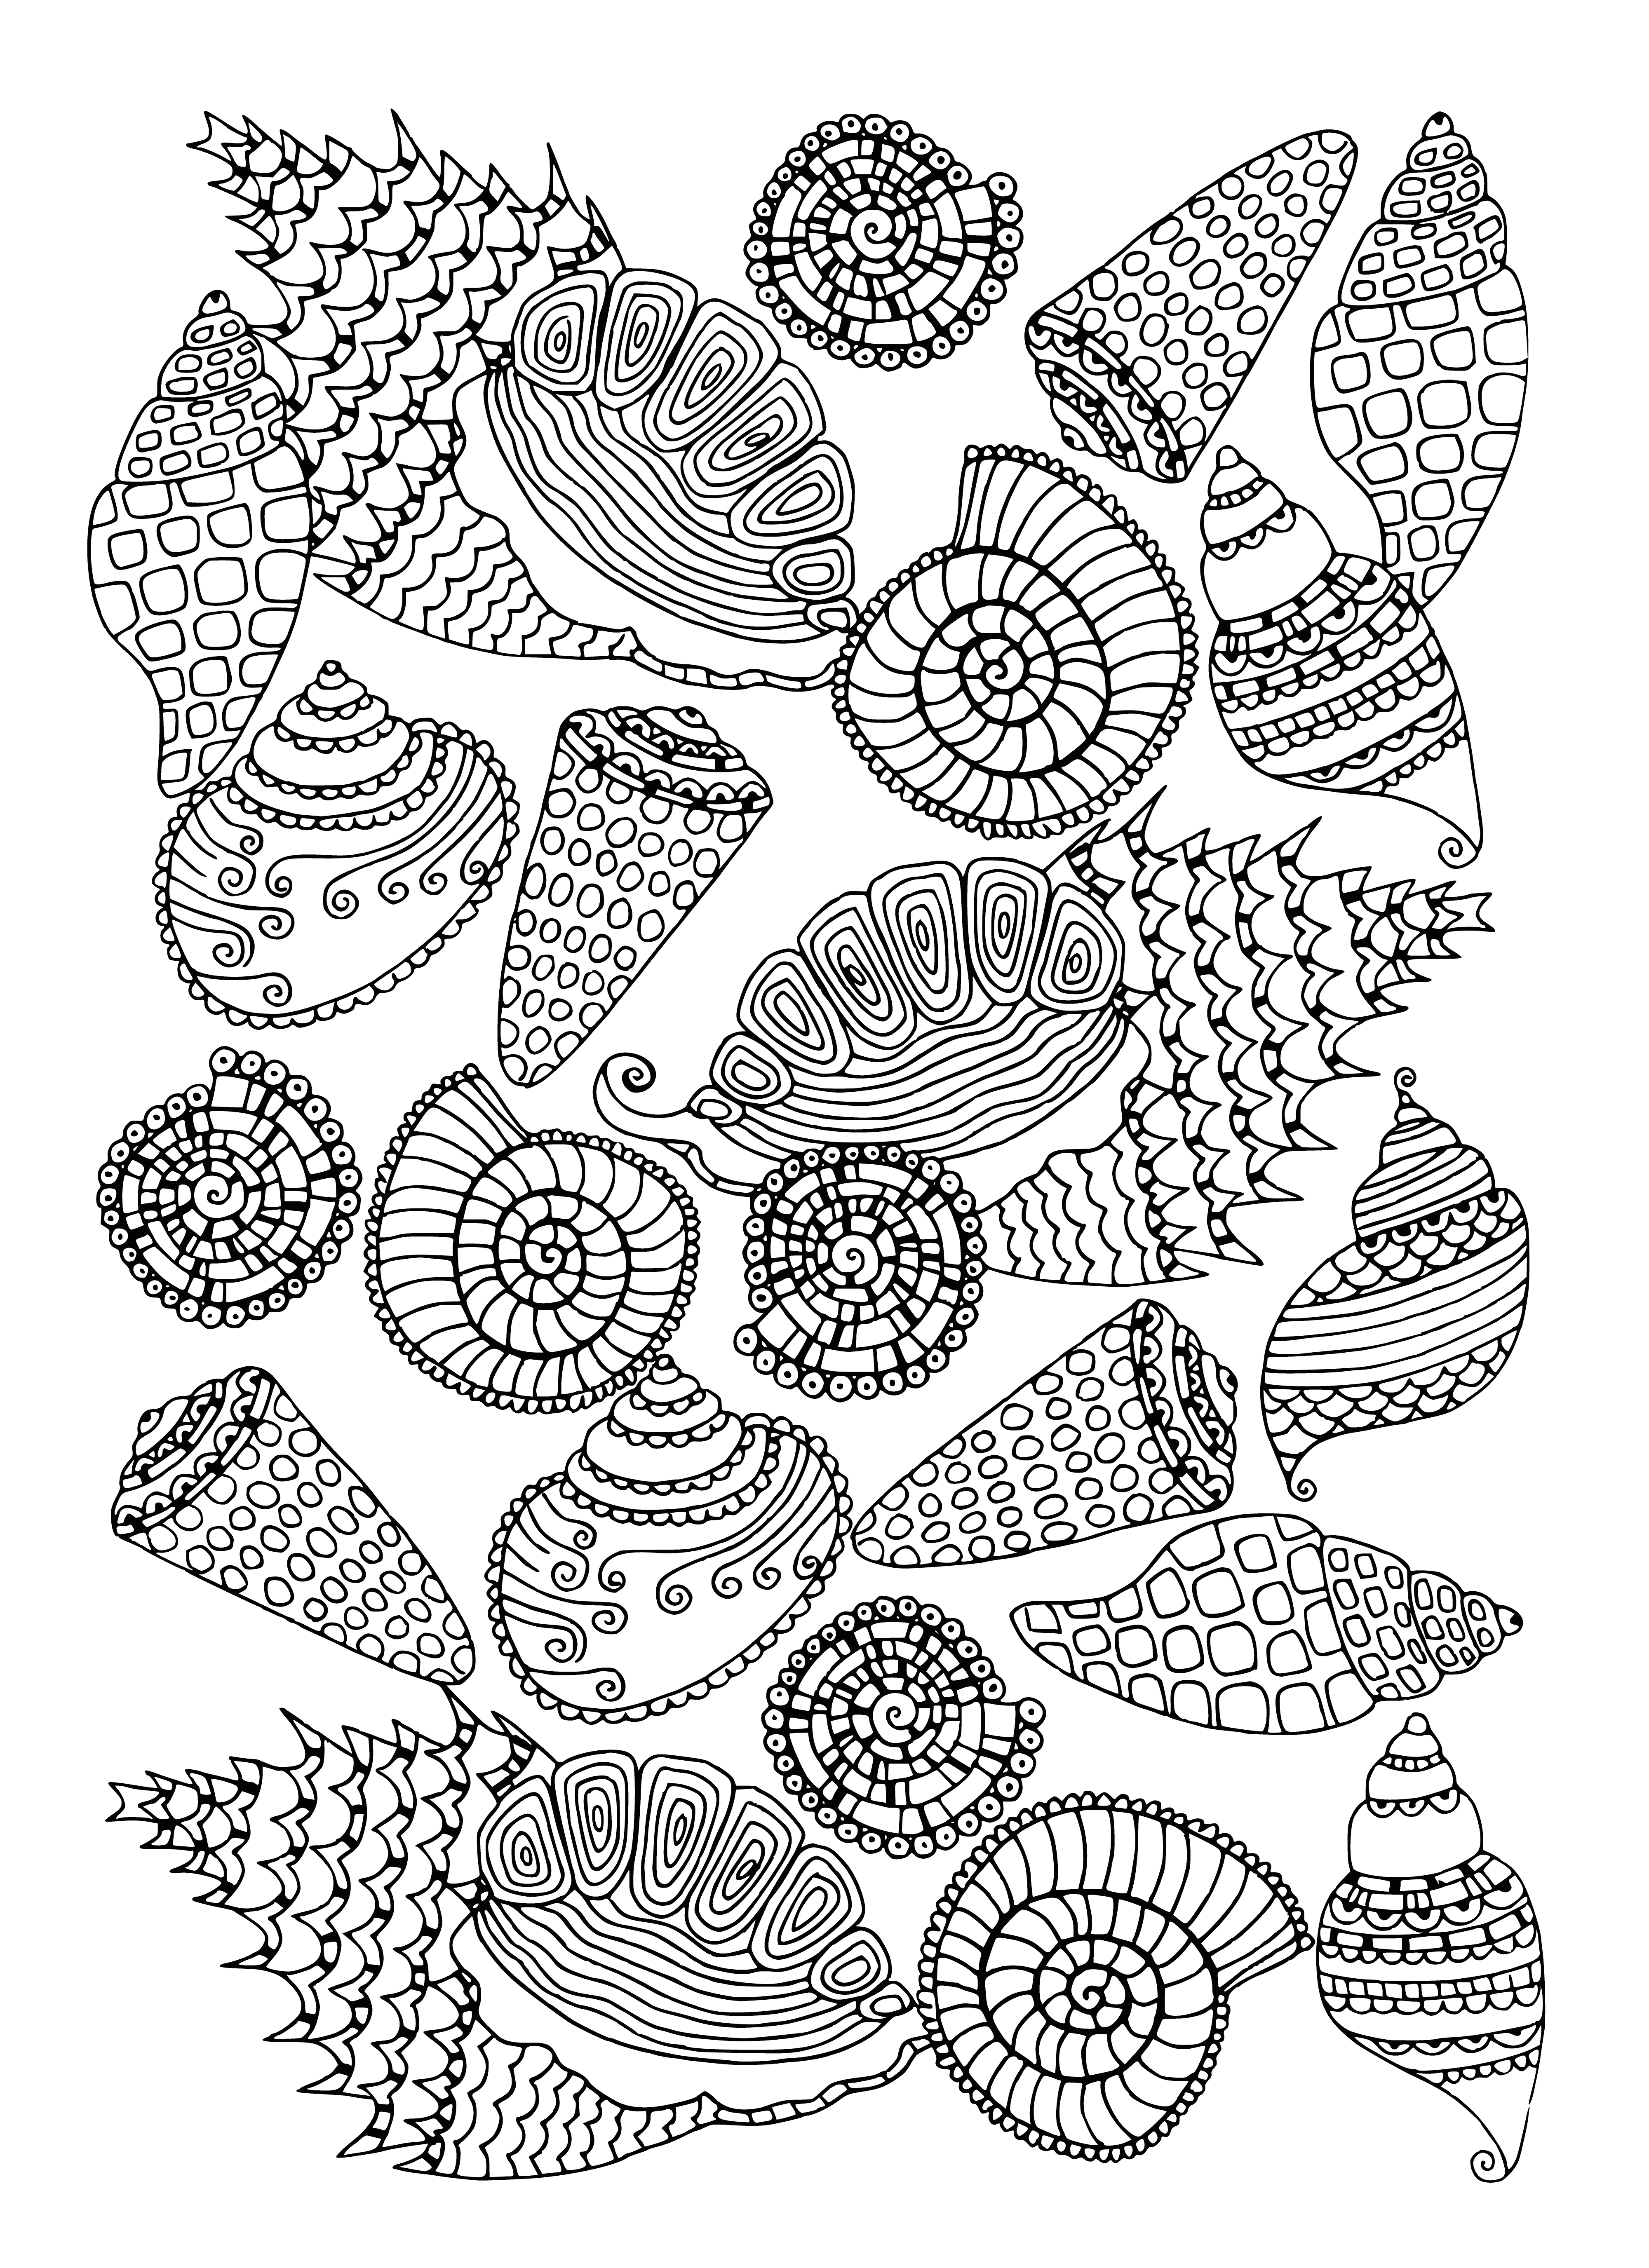 coloring page: ? ? Coloring page of a spirally seashell, adorned with swirls and set against a detailed seascape. #Coloring